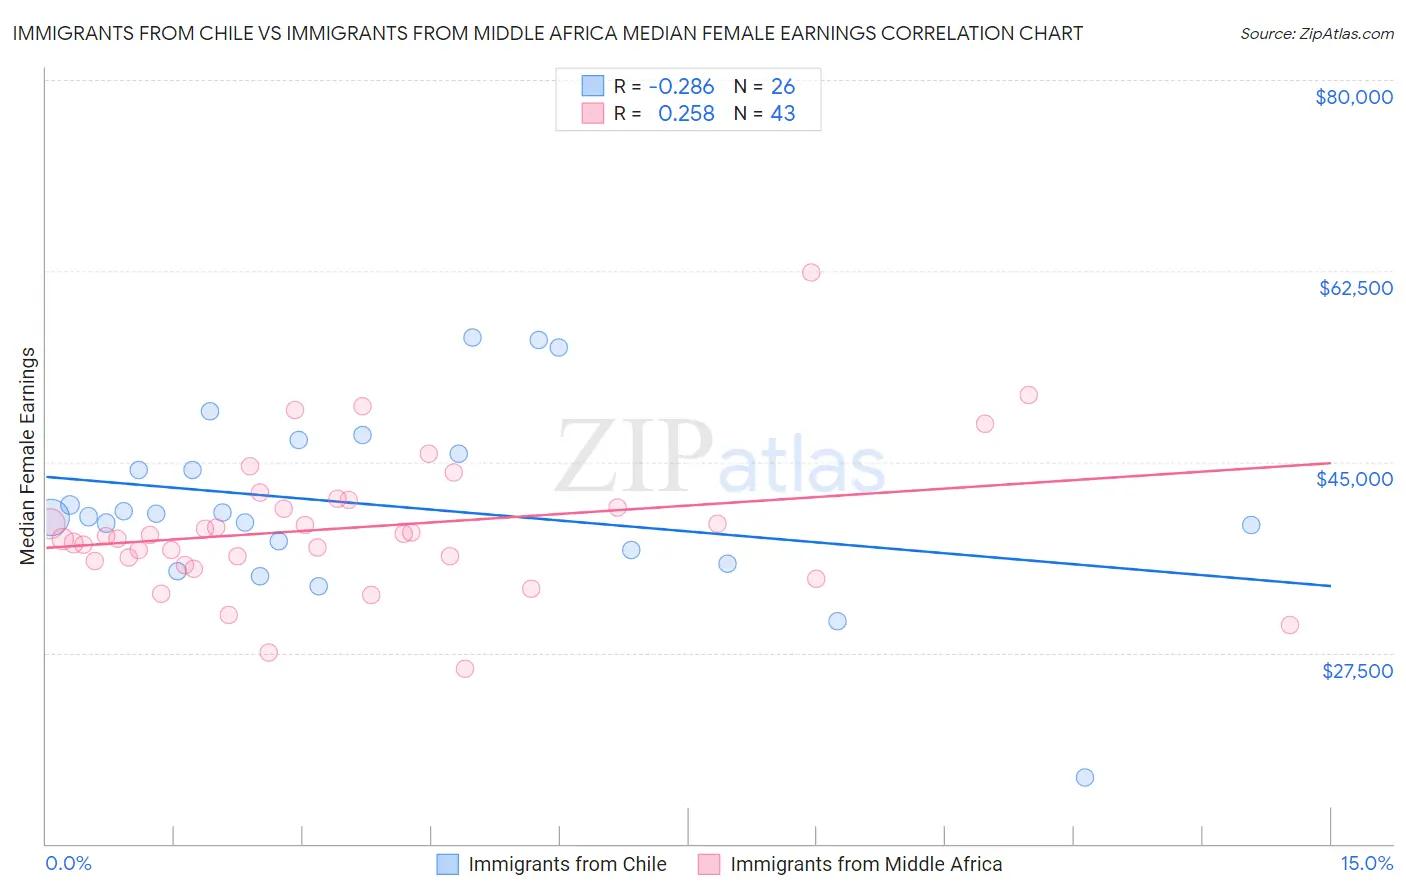 Immigrants from Chile vs Immigrants from Middle Africa Median Female Earnings